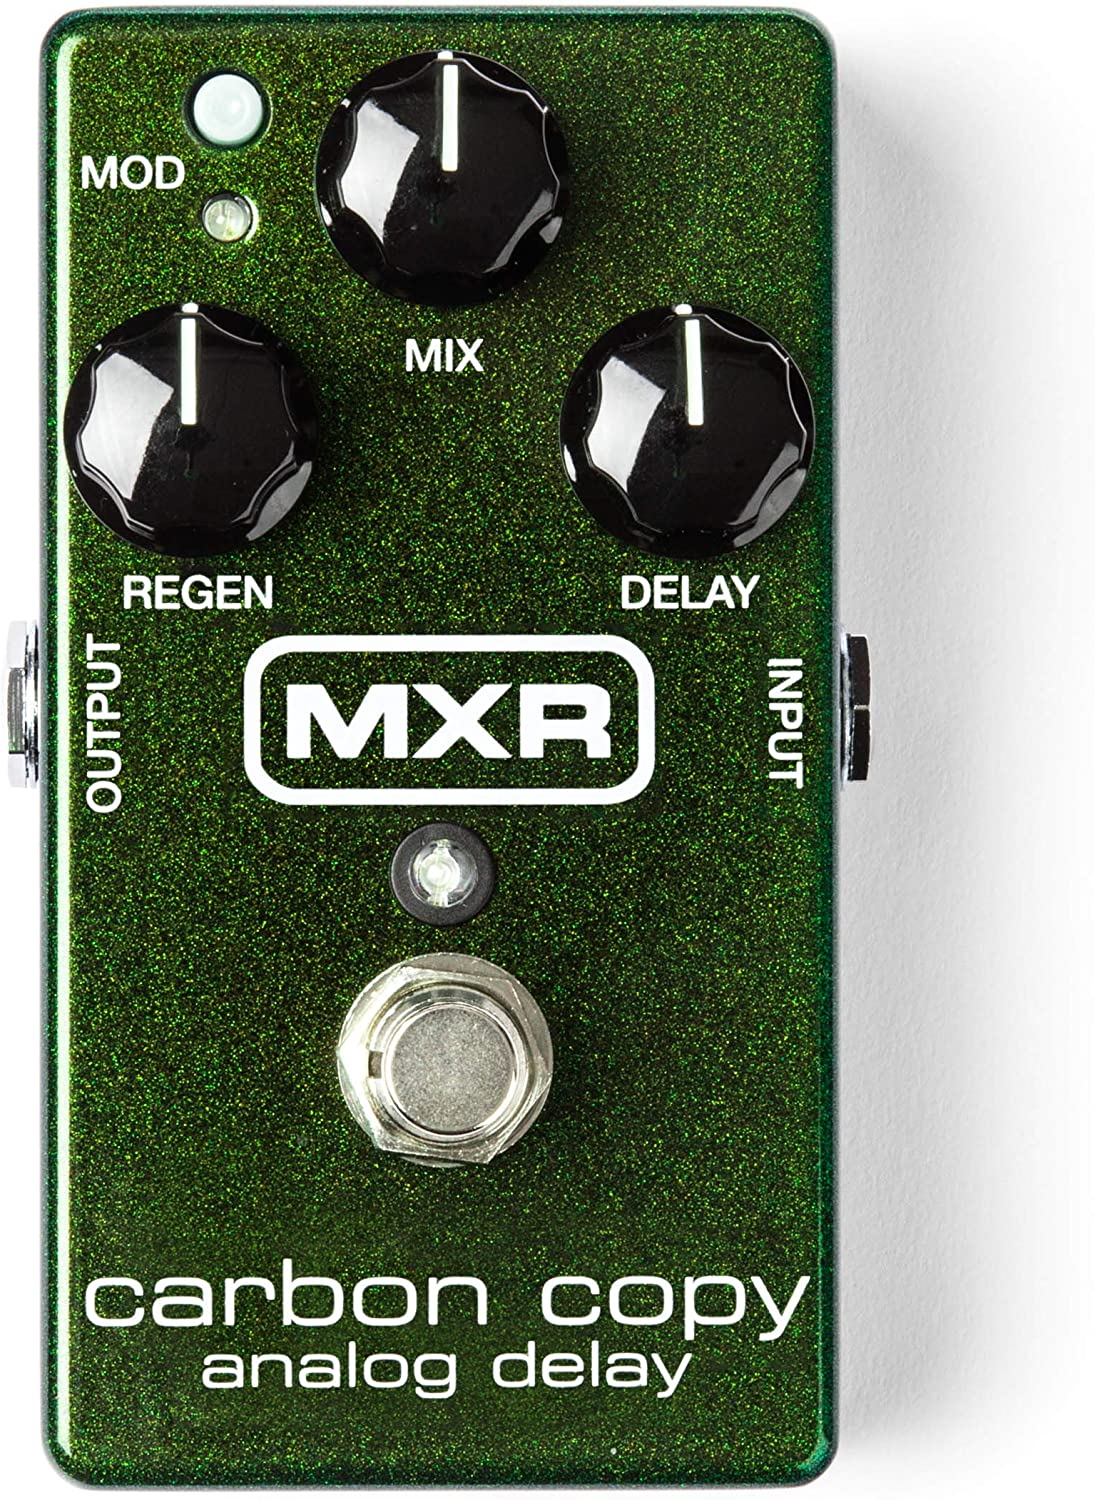 MXR Carbon Copy Analog Delay Guitar Effects Pedal - Terry Carter